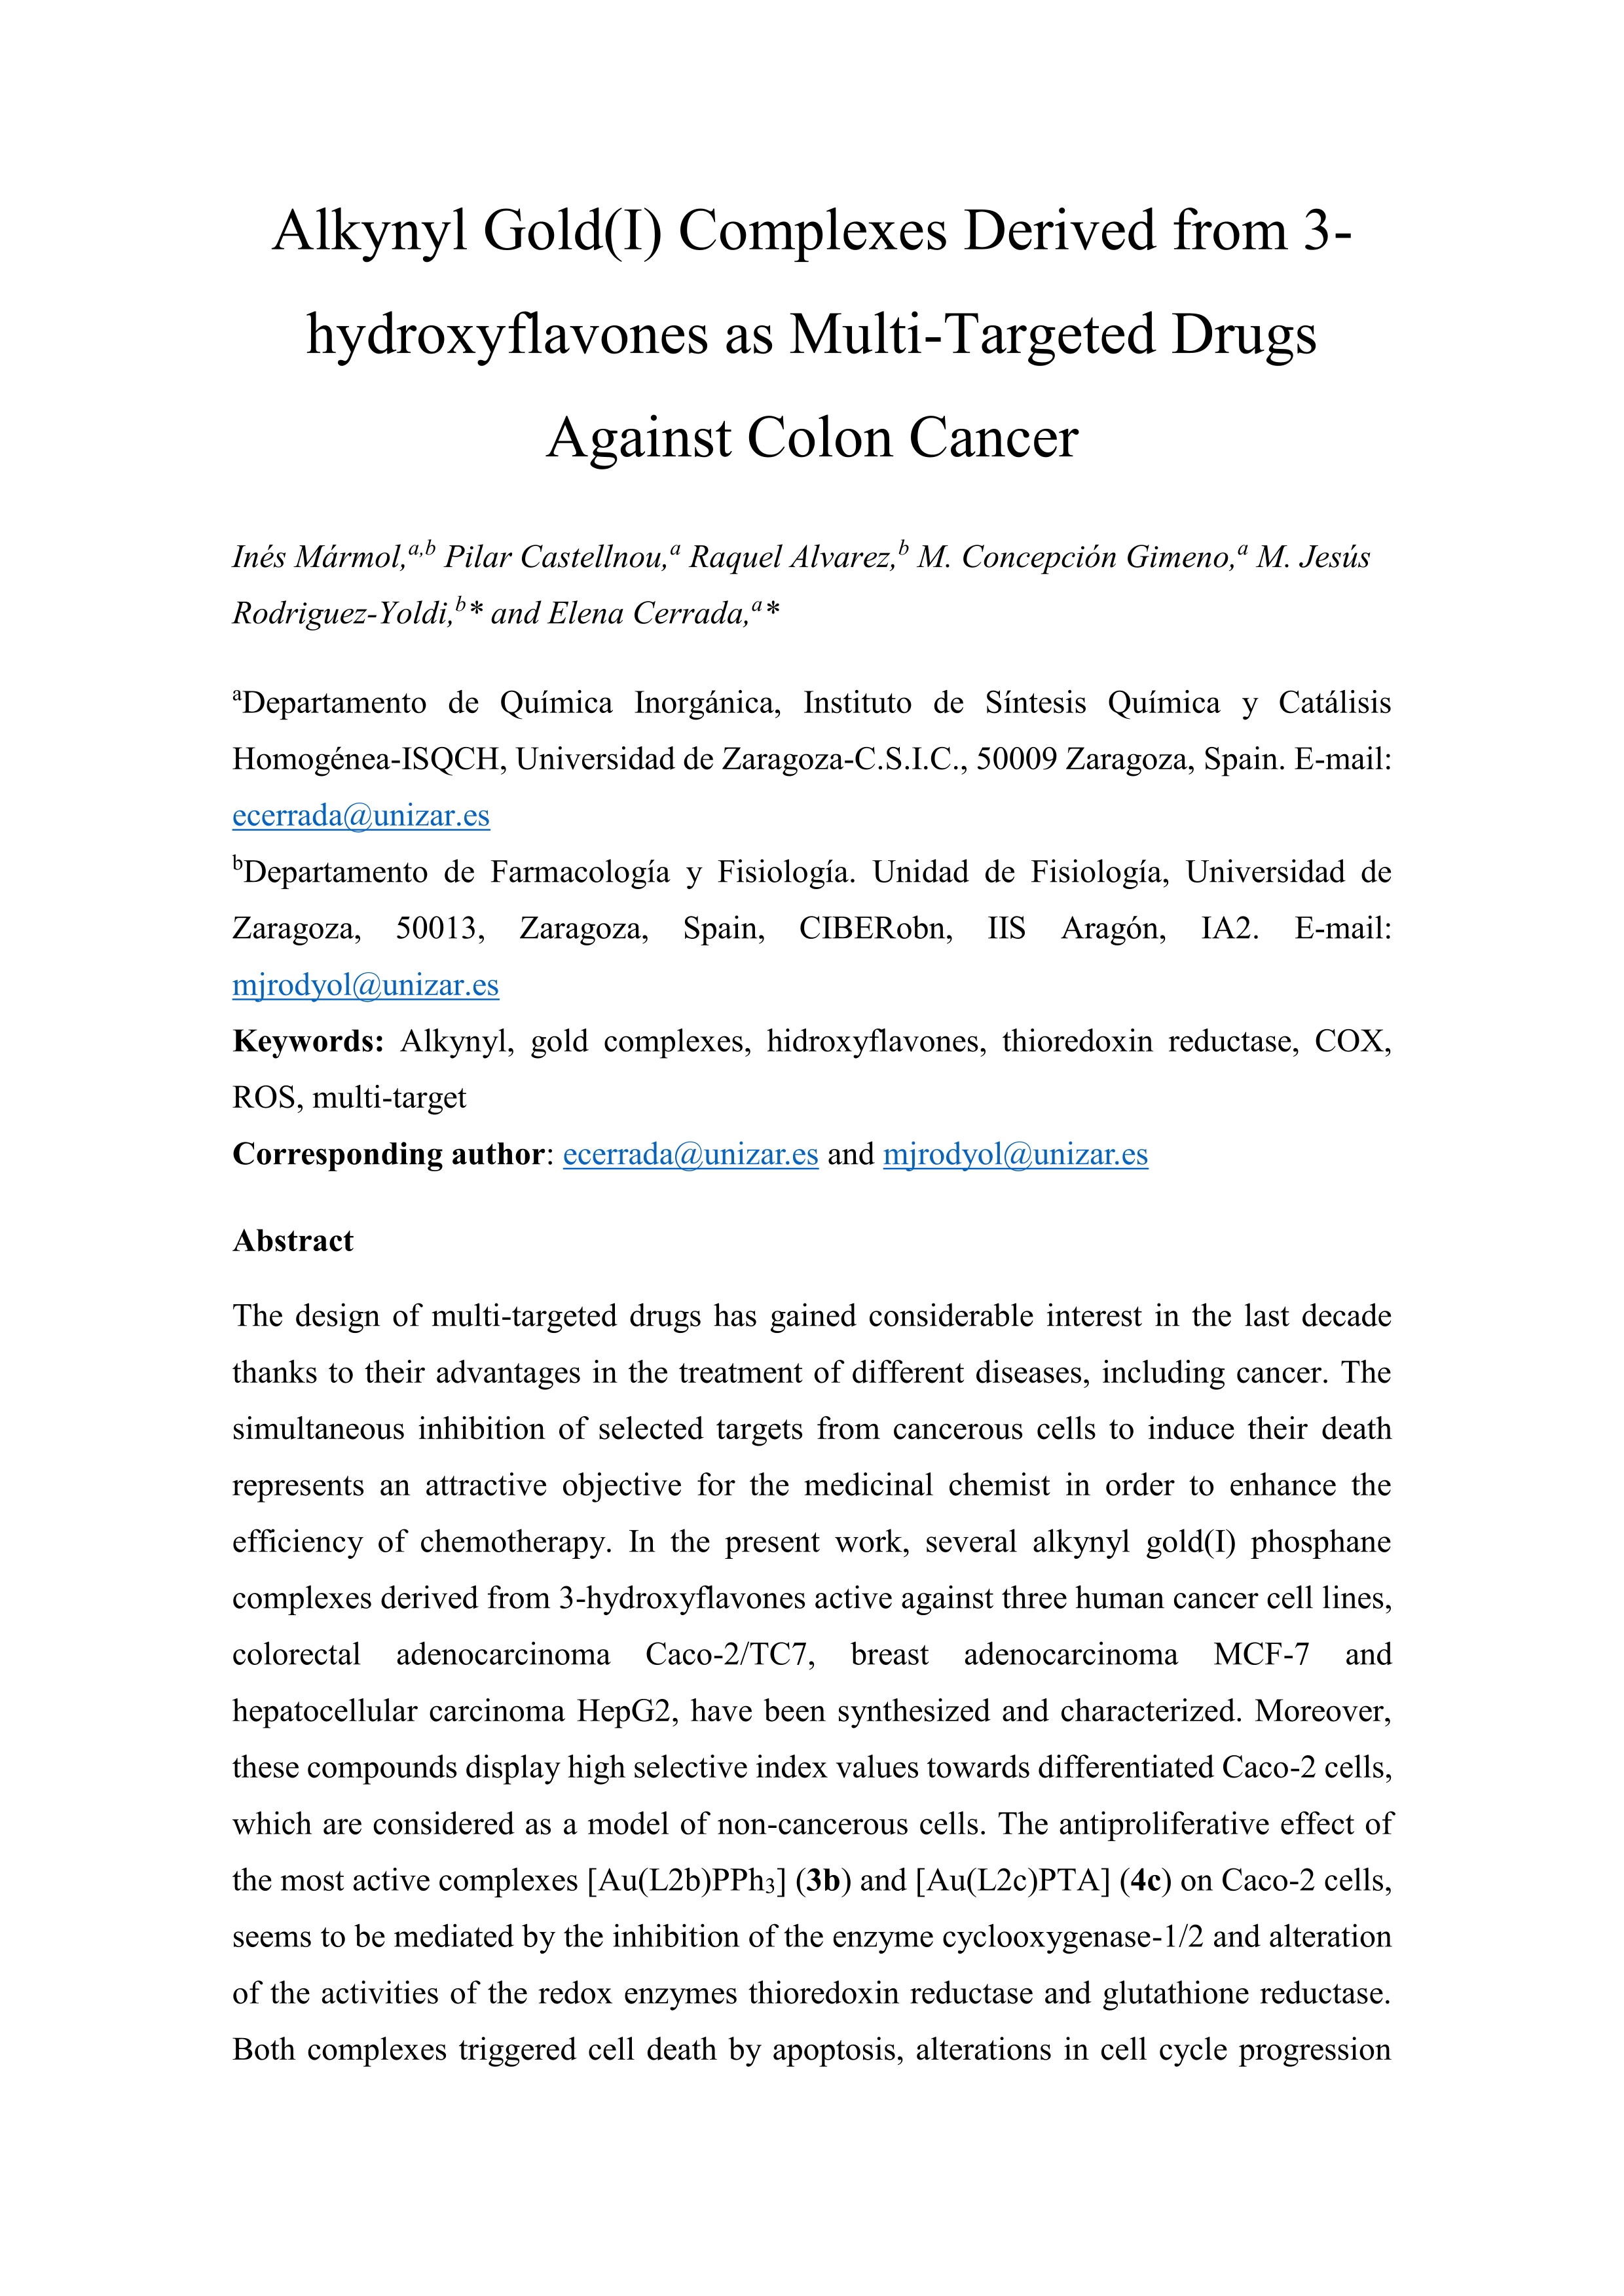 Alkynyl Gold(I) complexes derived from 3-hydroxyflavones as multi-targeted drugs against colon cancer